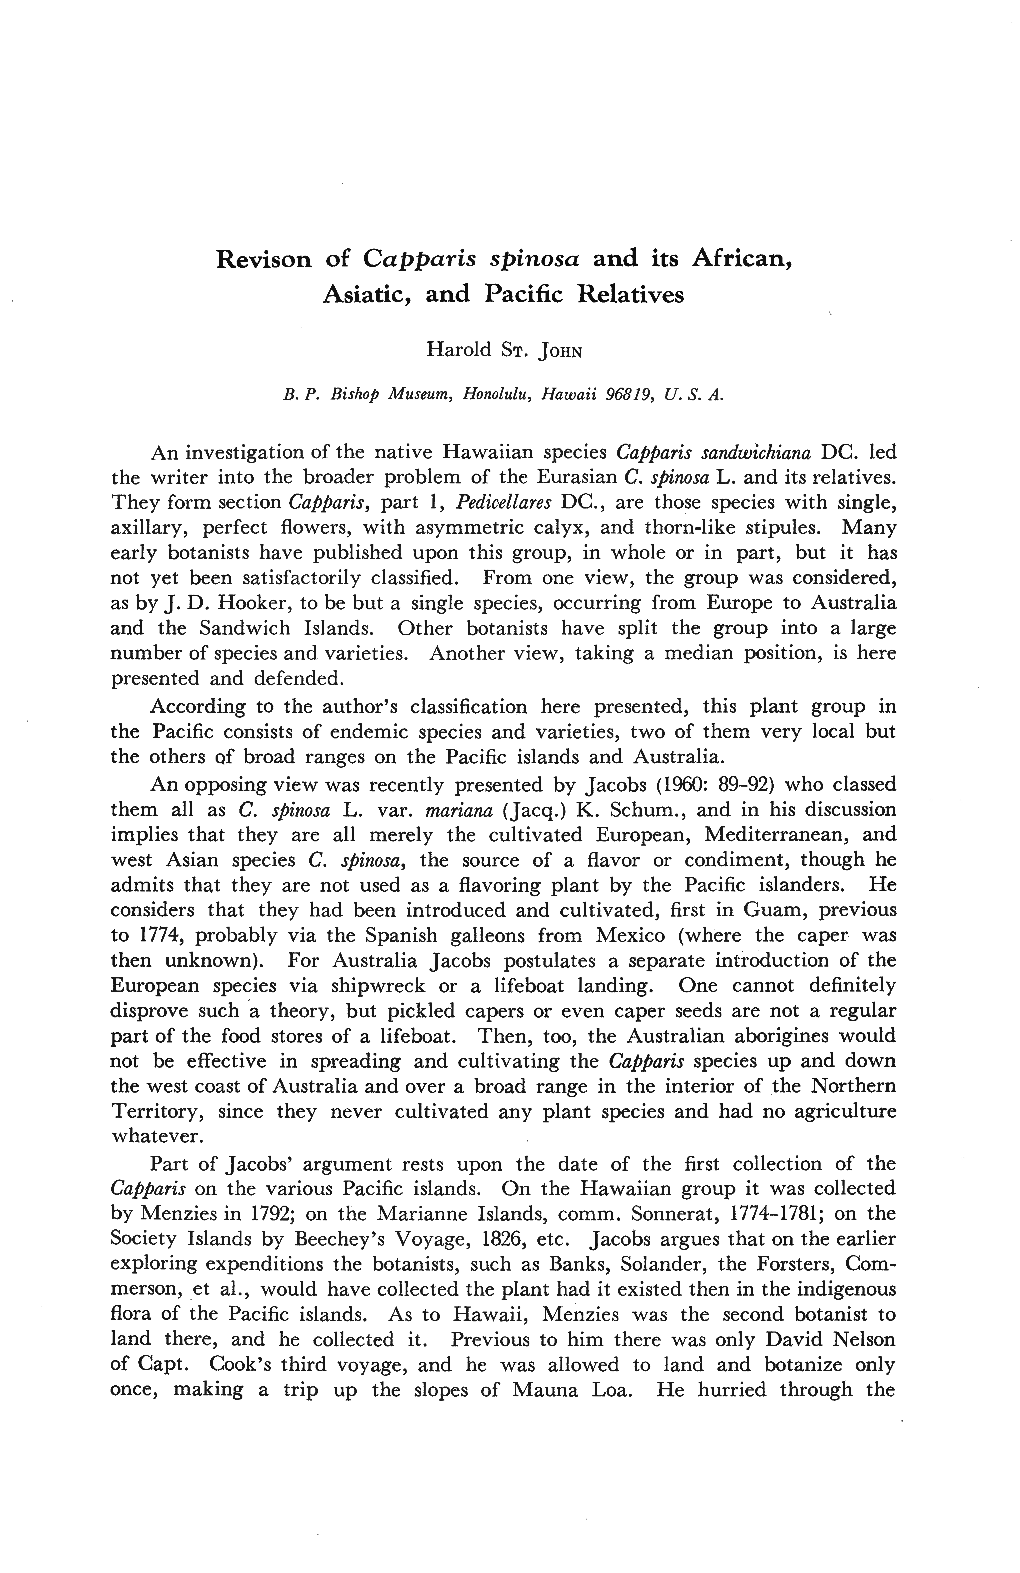 Asiatic, and Pacific Relatives